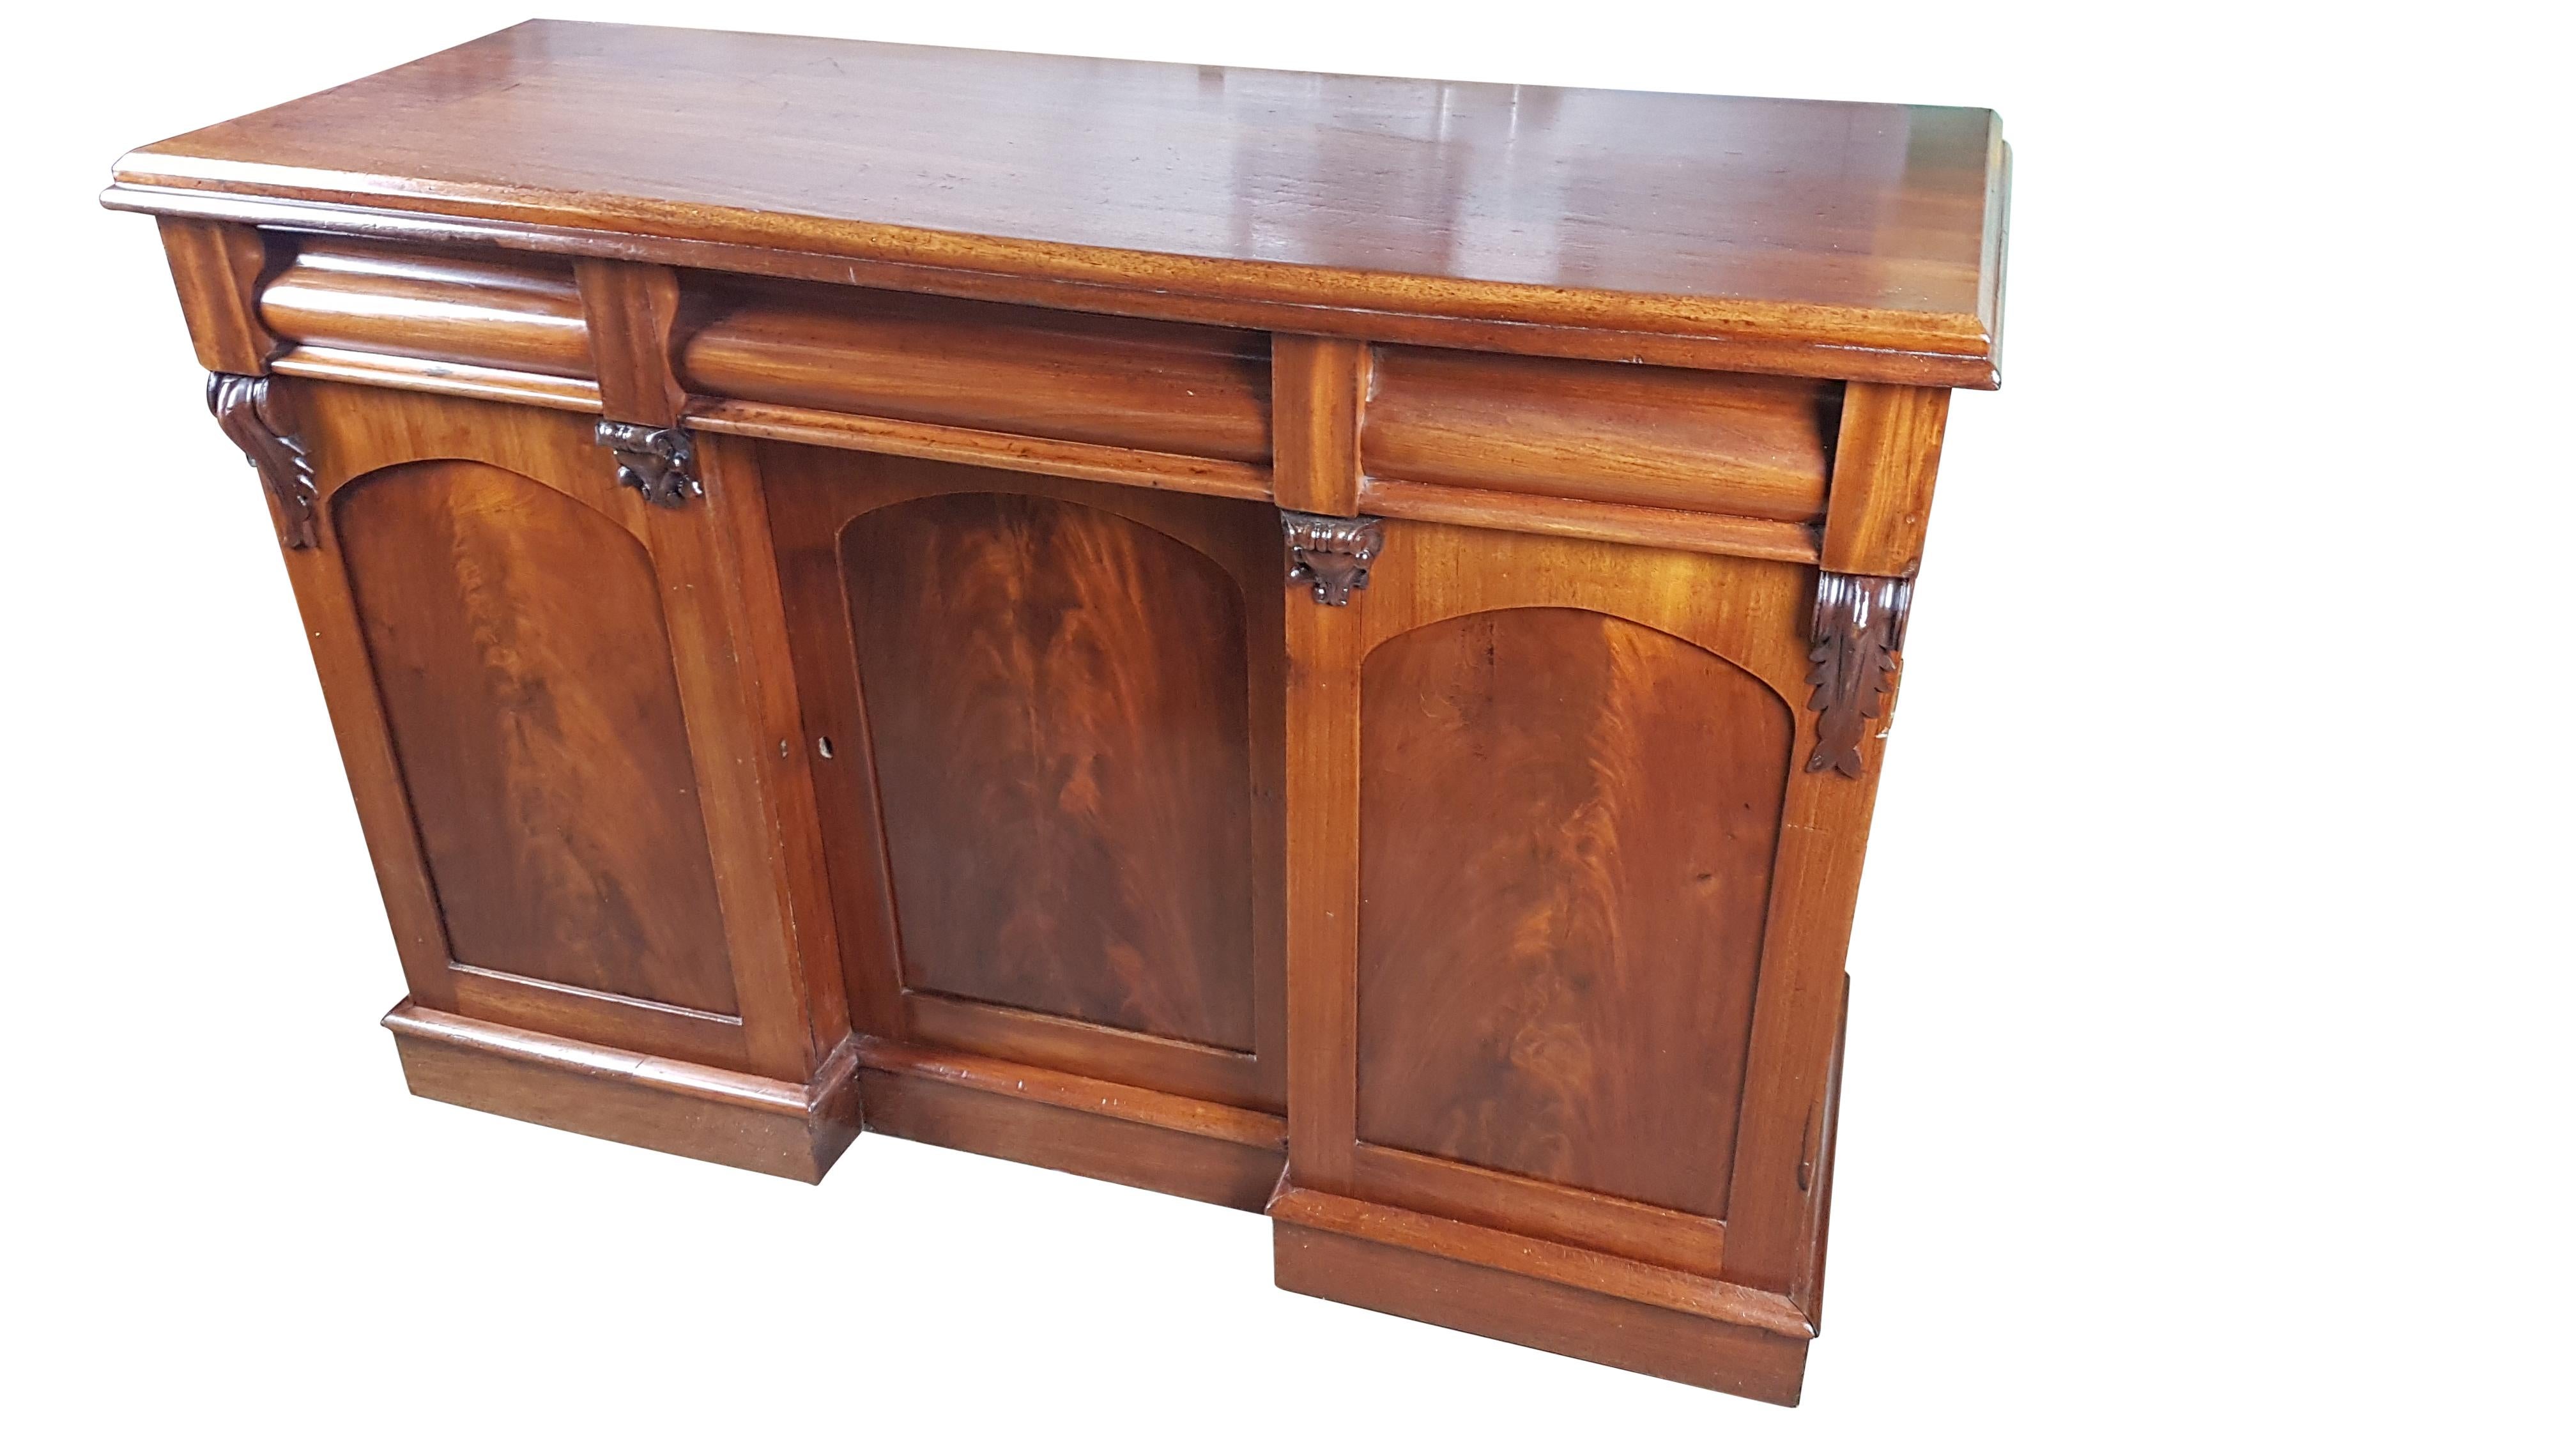 A nice petite solid mahogany Victorian sideboard with flame mahogany panels and inverted breakfront cupboards. The sideboard is in very good structural condition with the polish having recently been revived. There are marks and dents etc. but